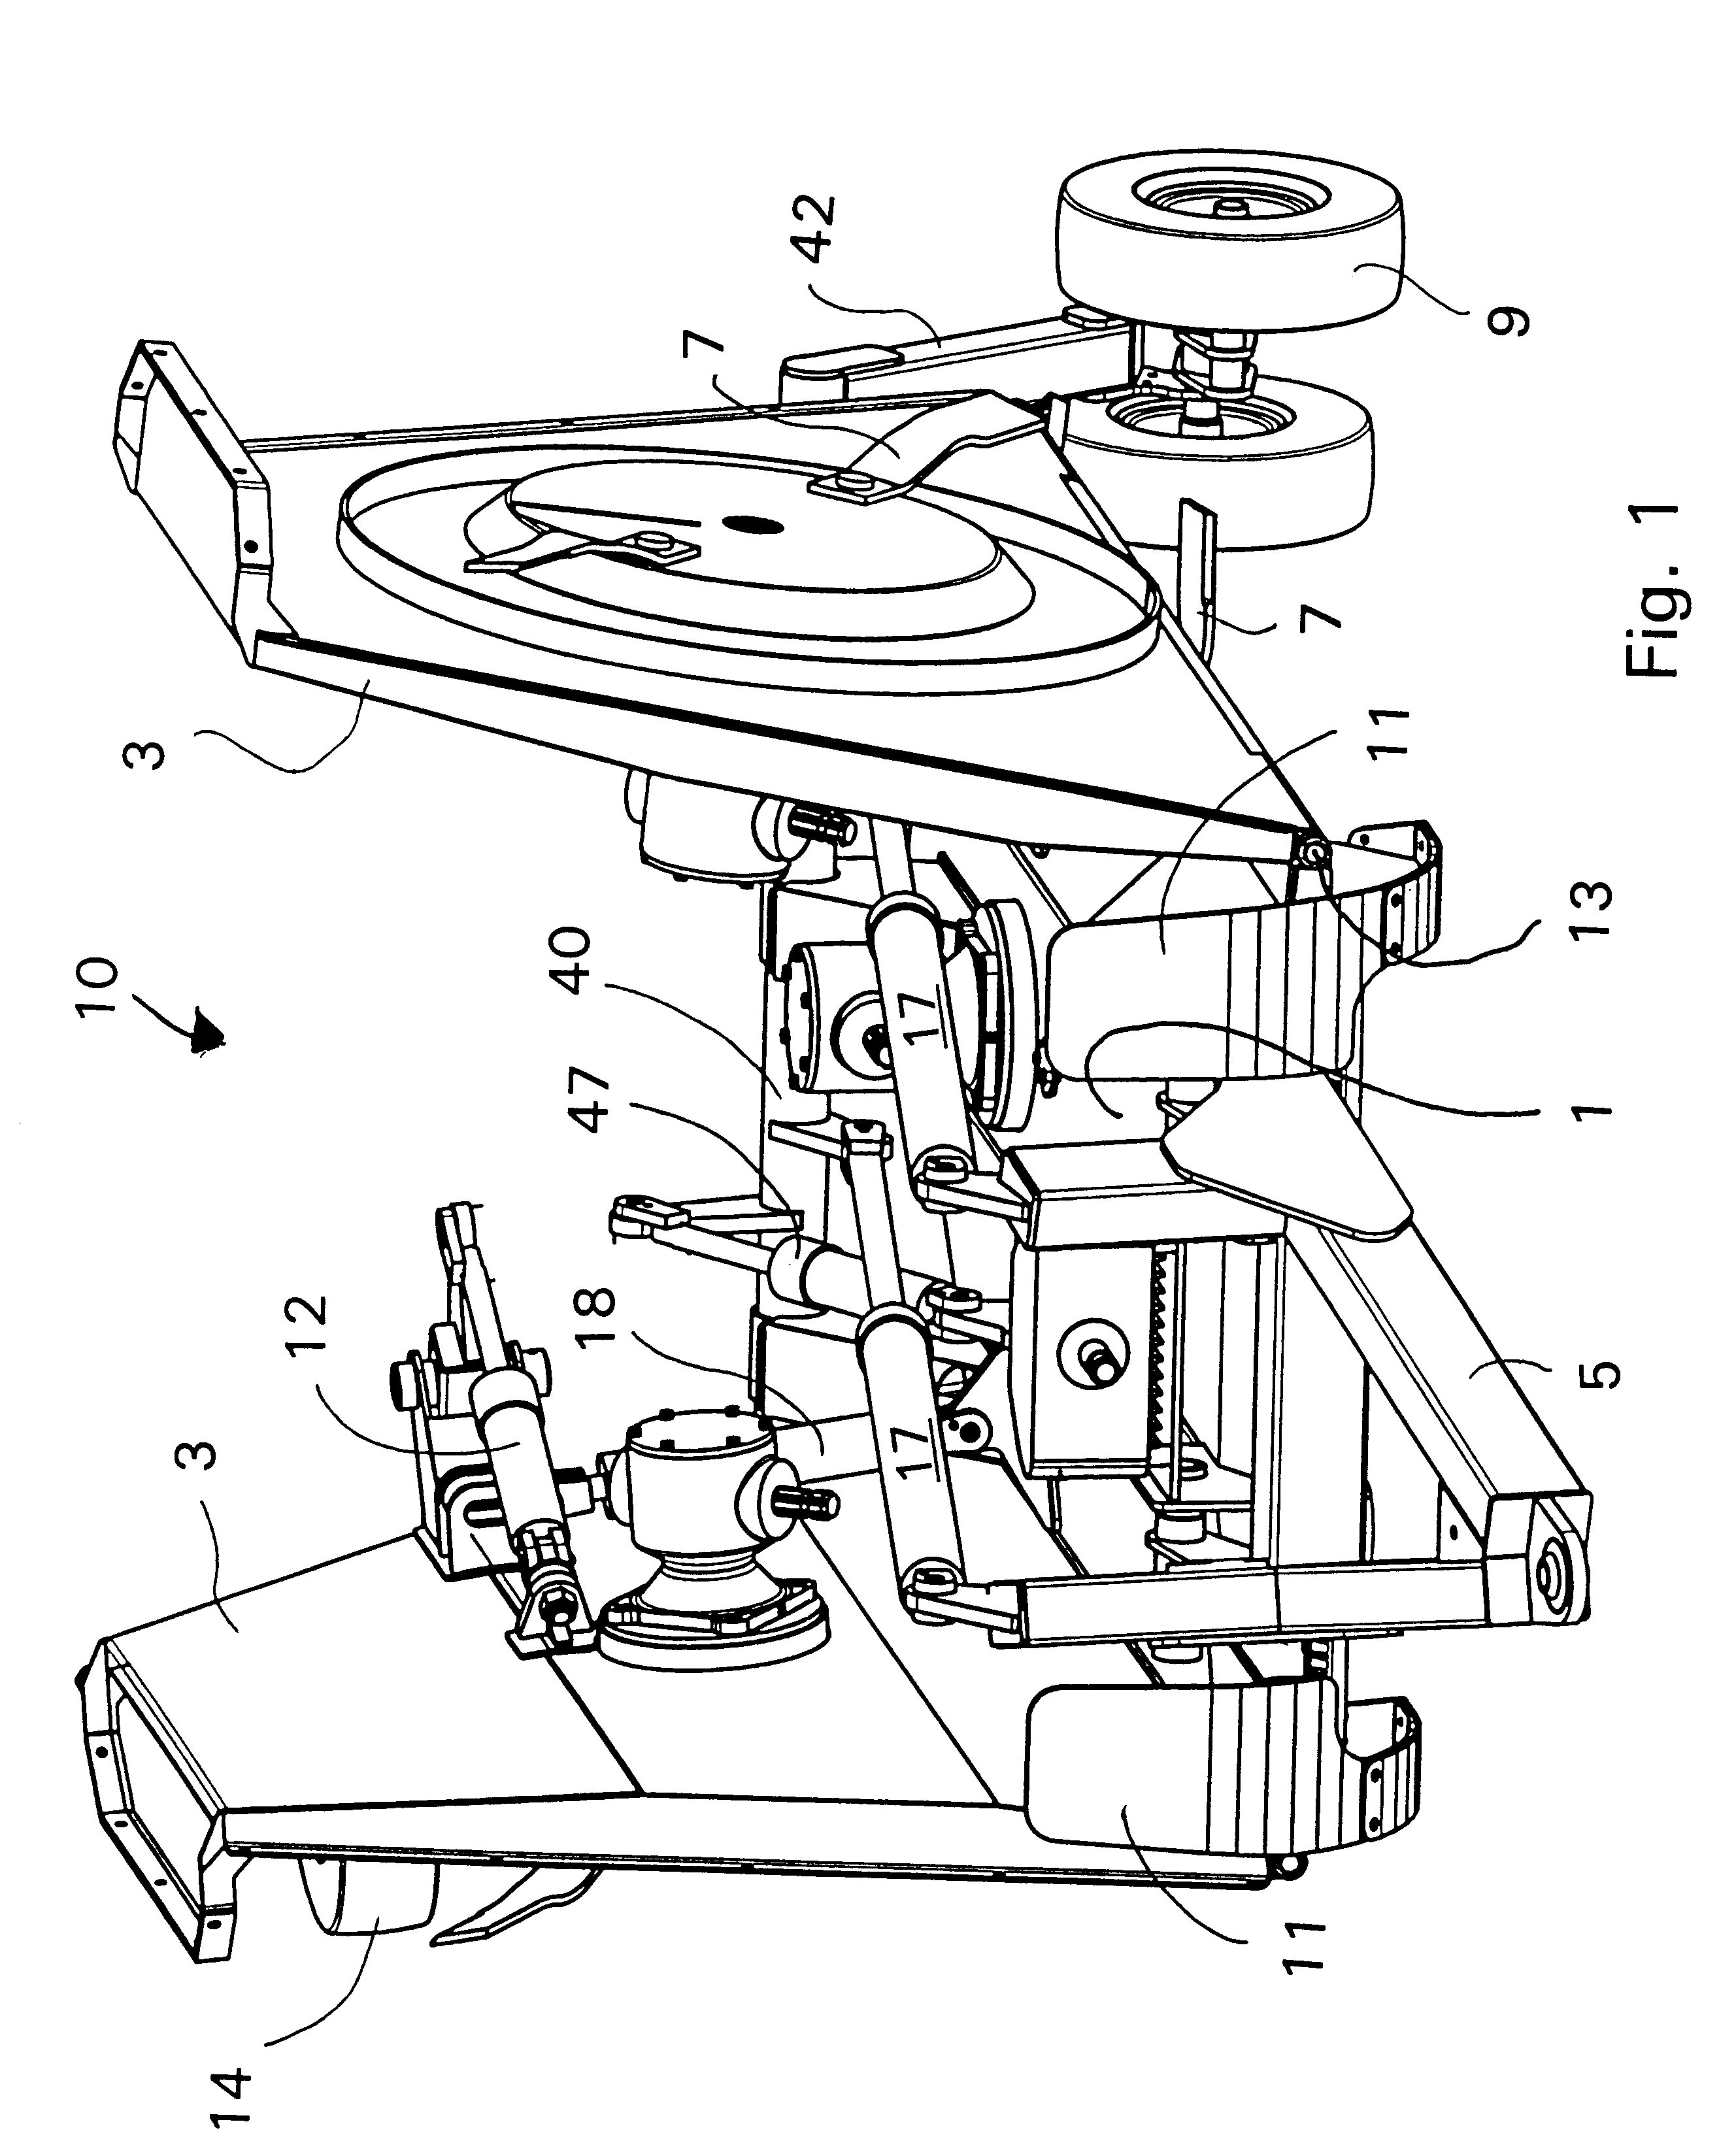 Double deck rotary mower body